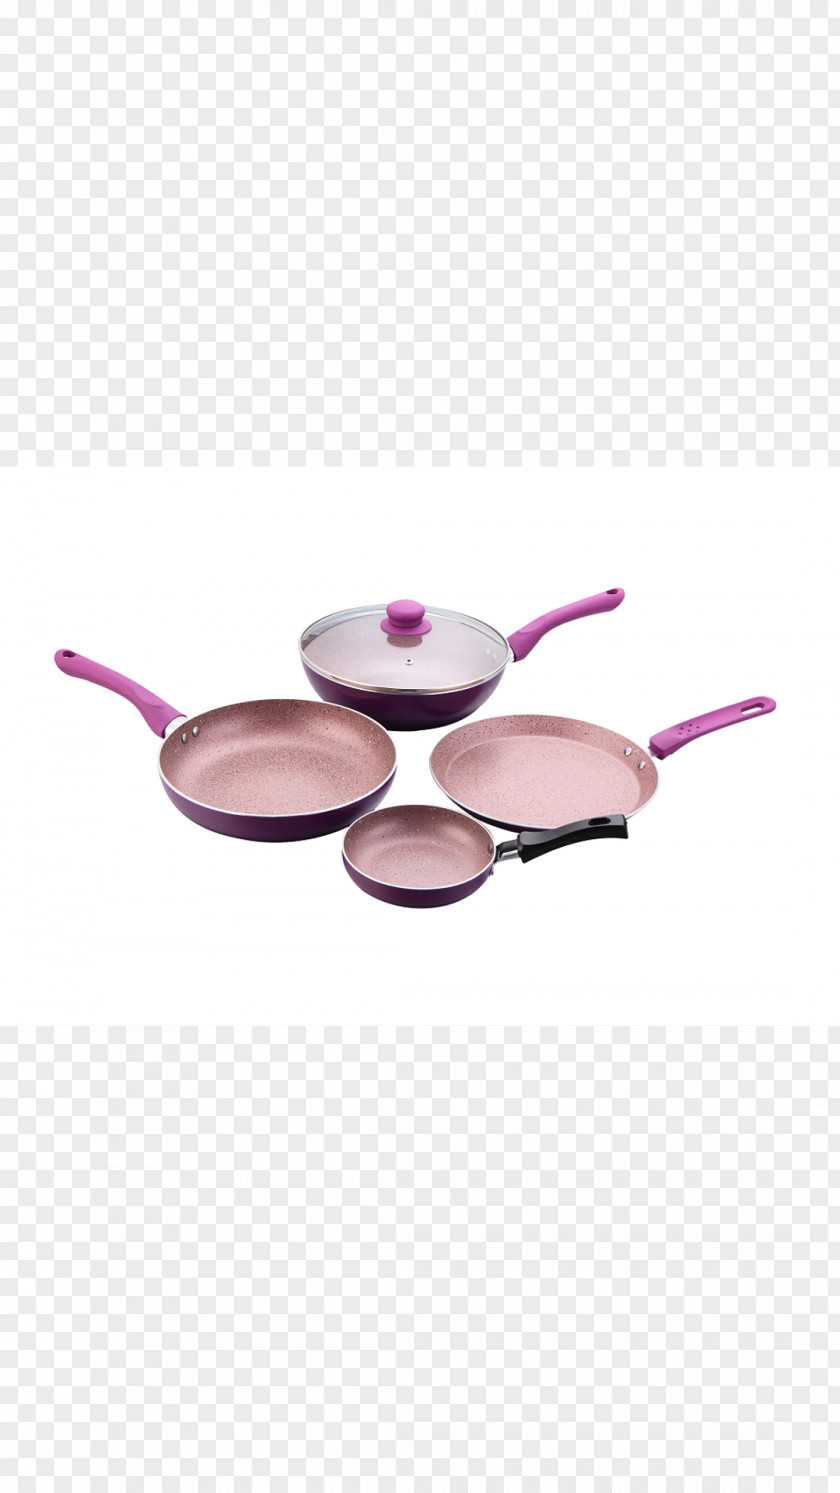 Frying Pan Cookware Wonderchef Non-stick Surface Induction Cooking PNG